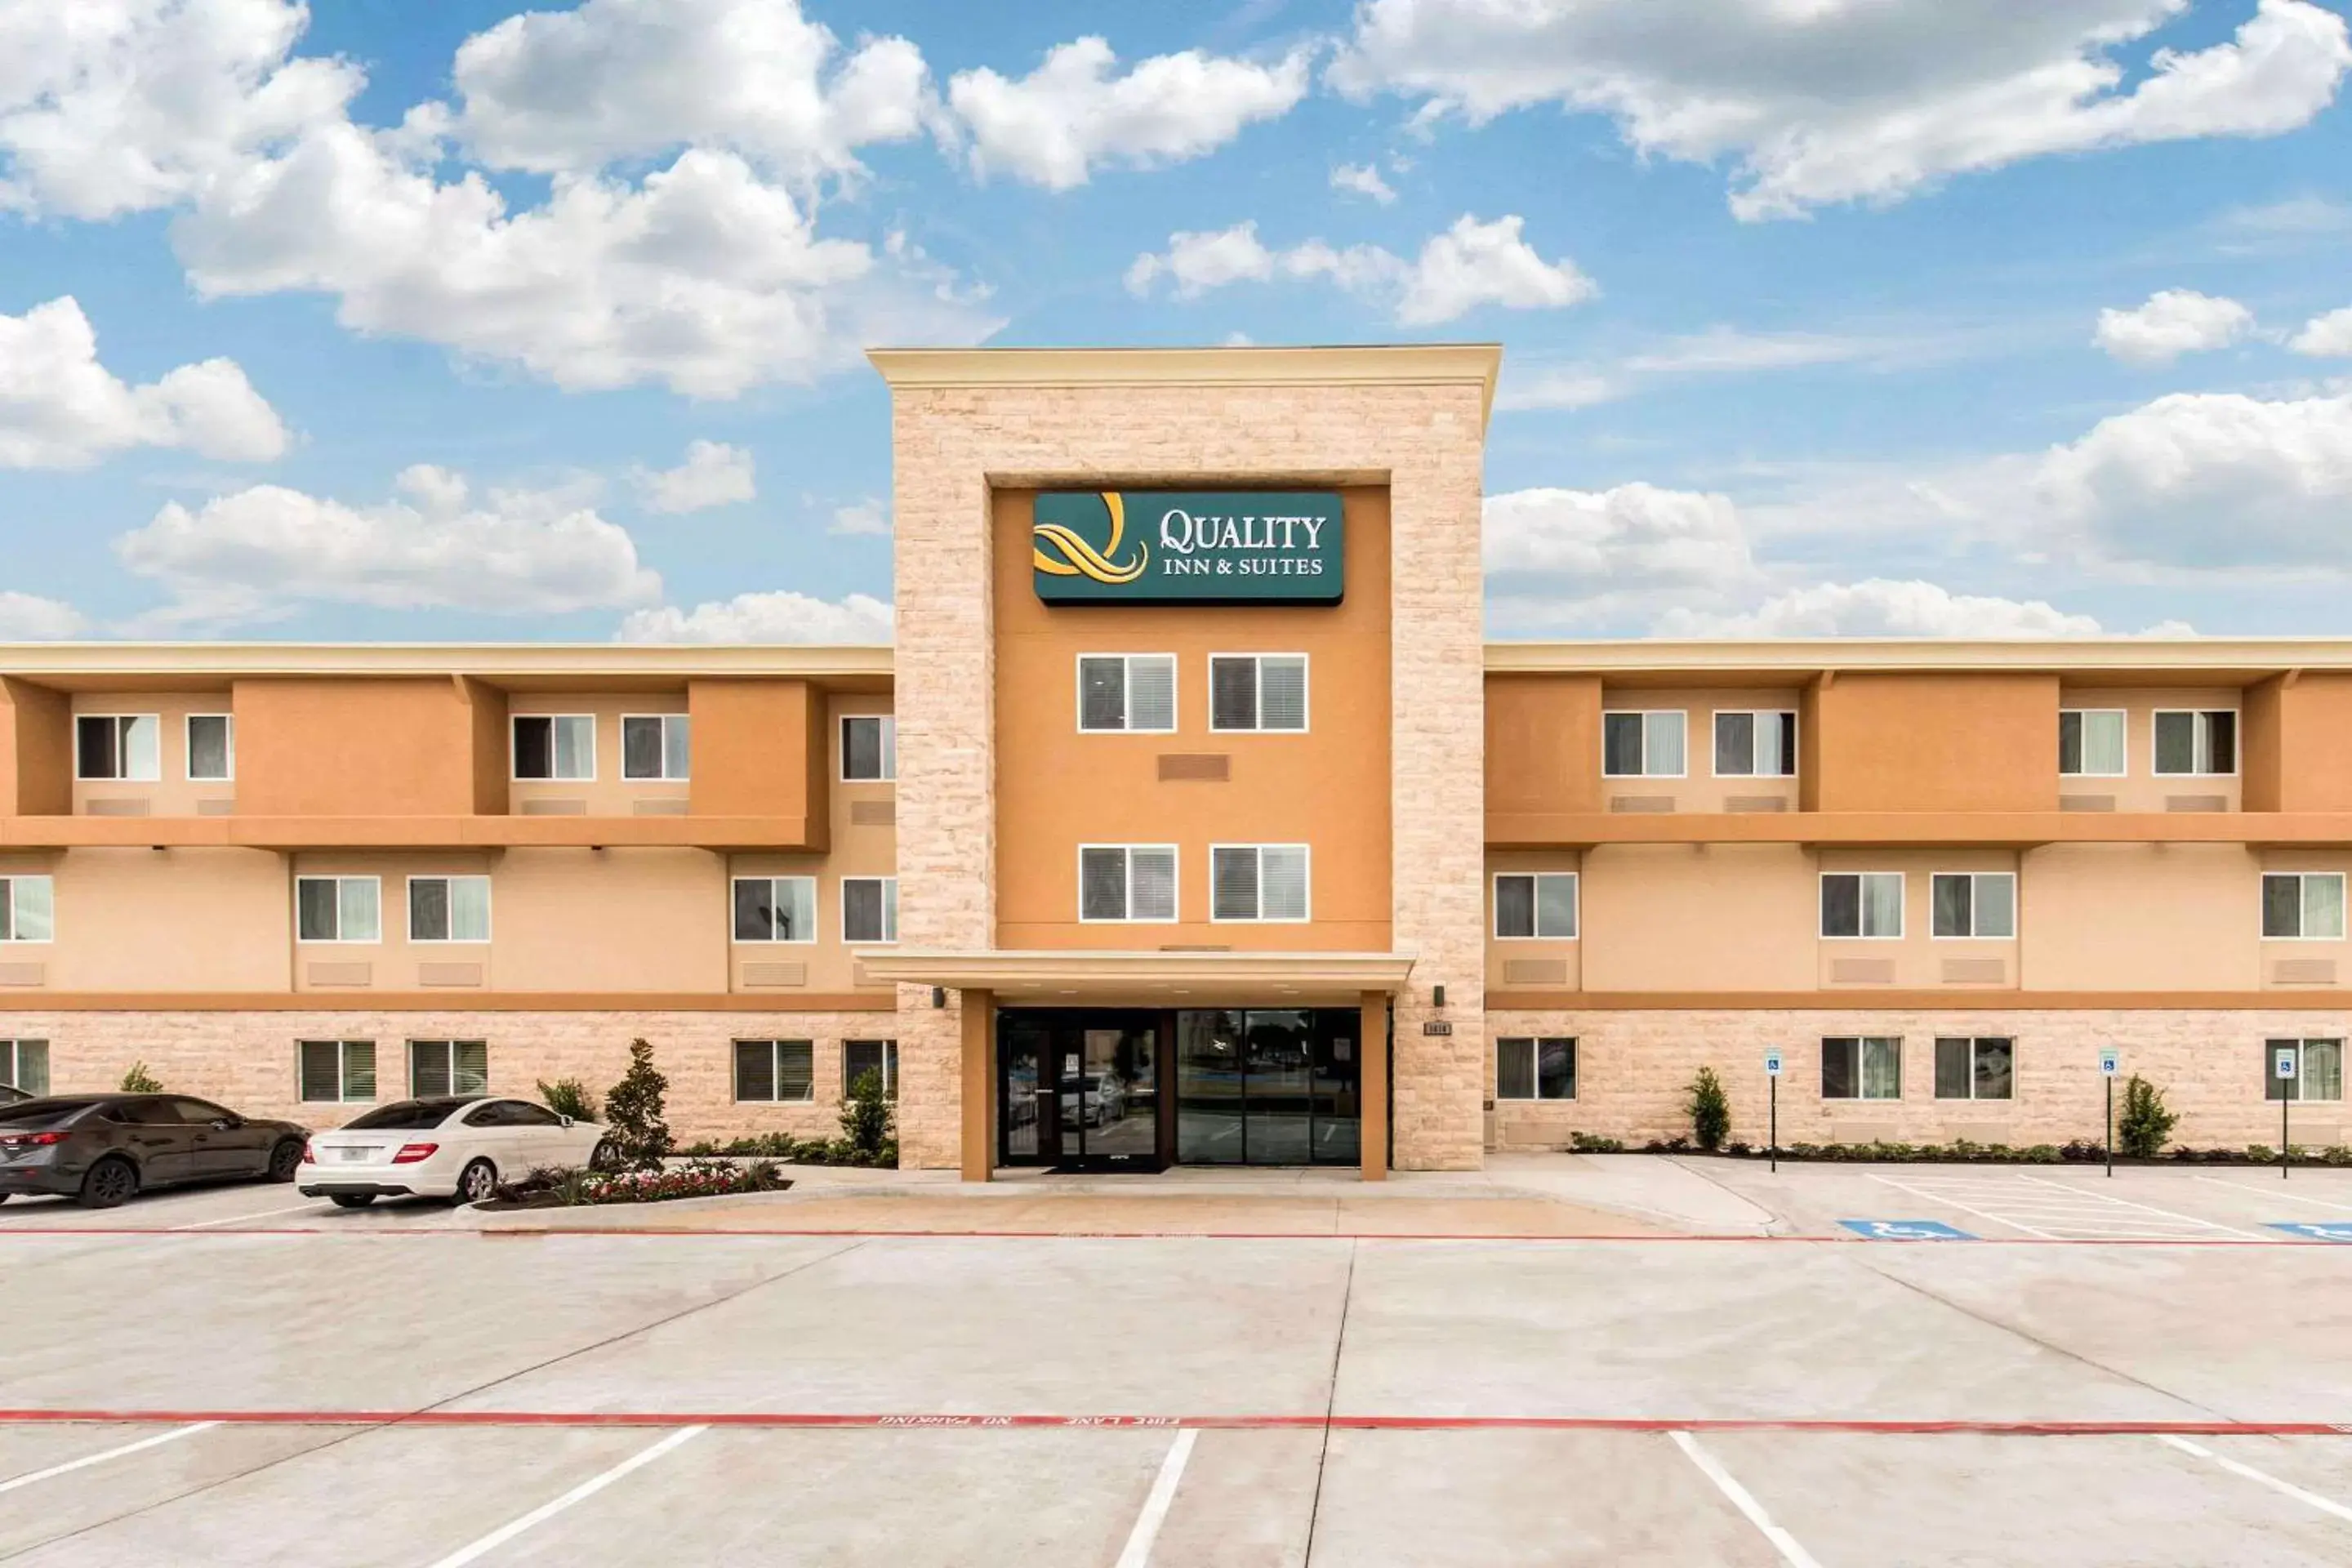 Property building in Quality Inn & Suites Plano